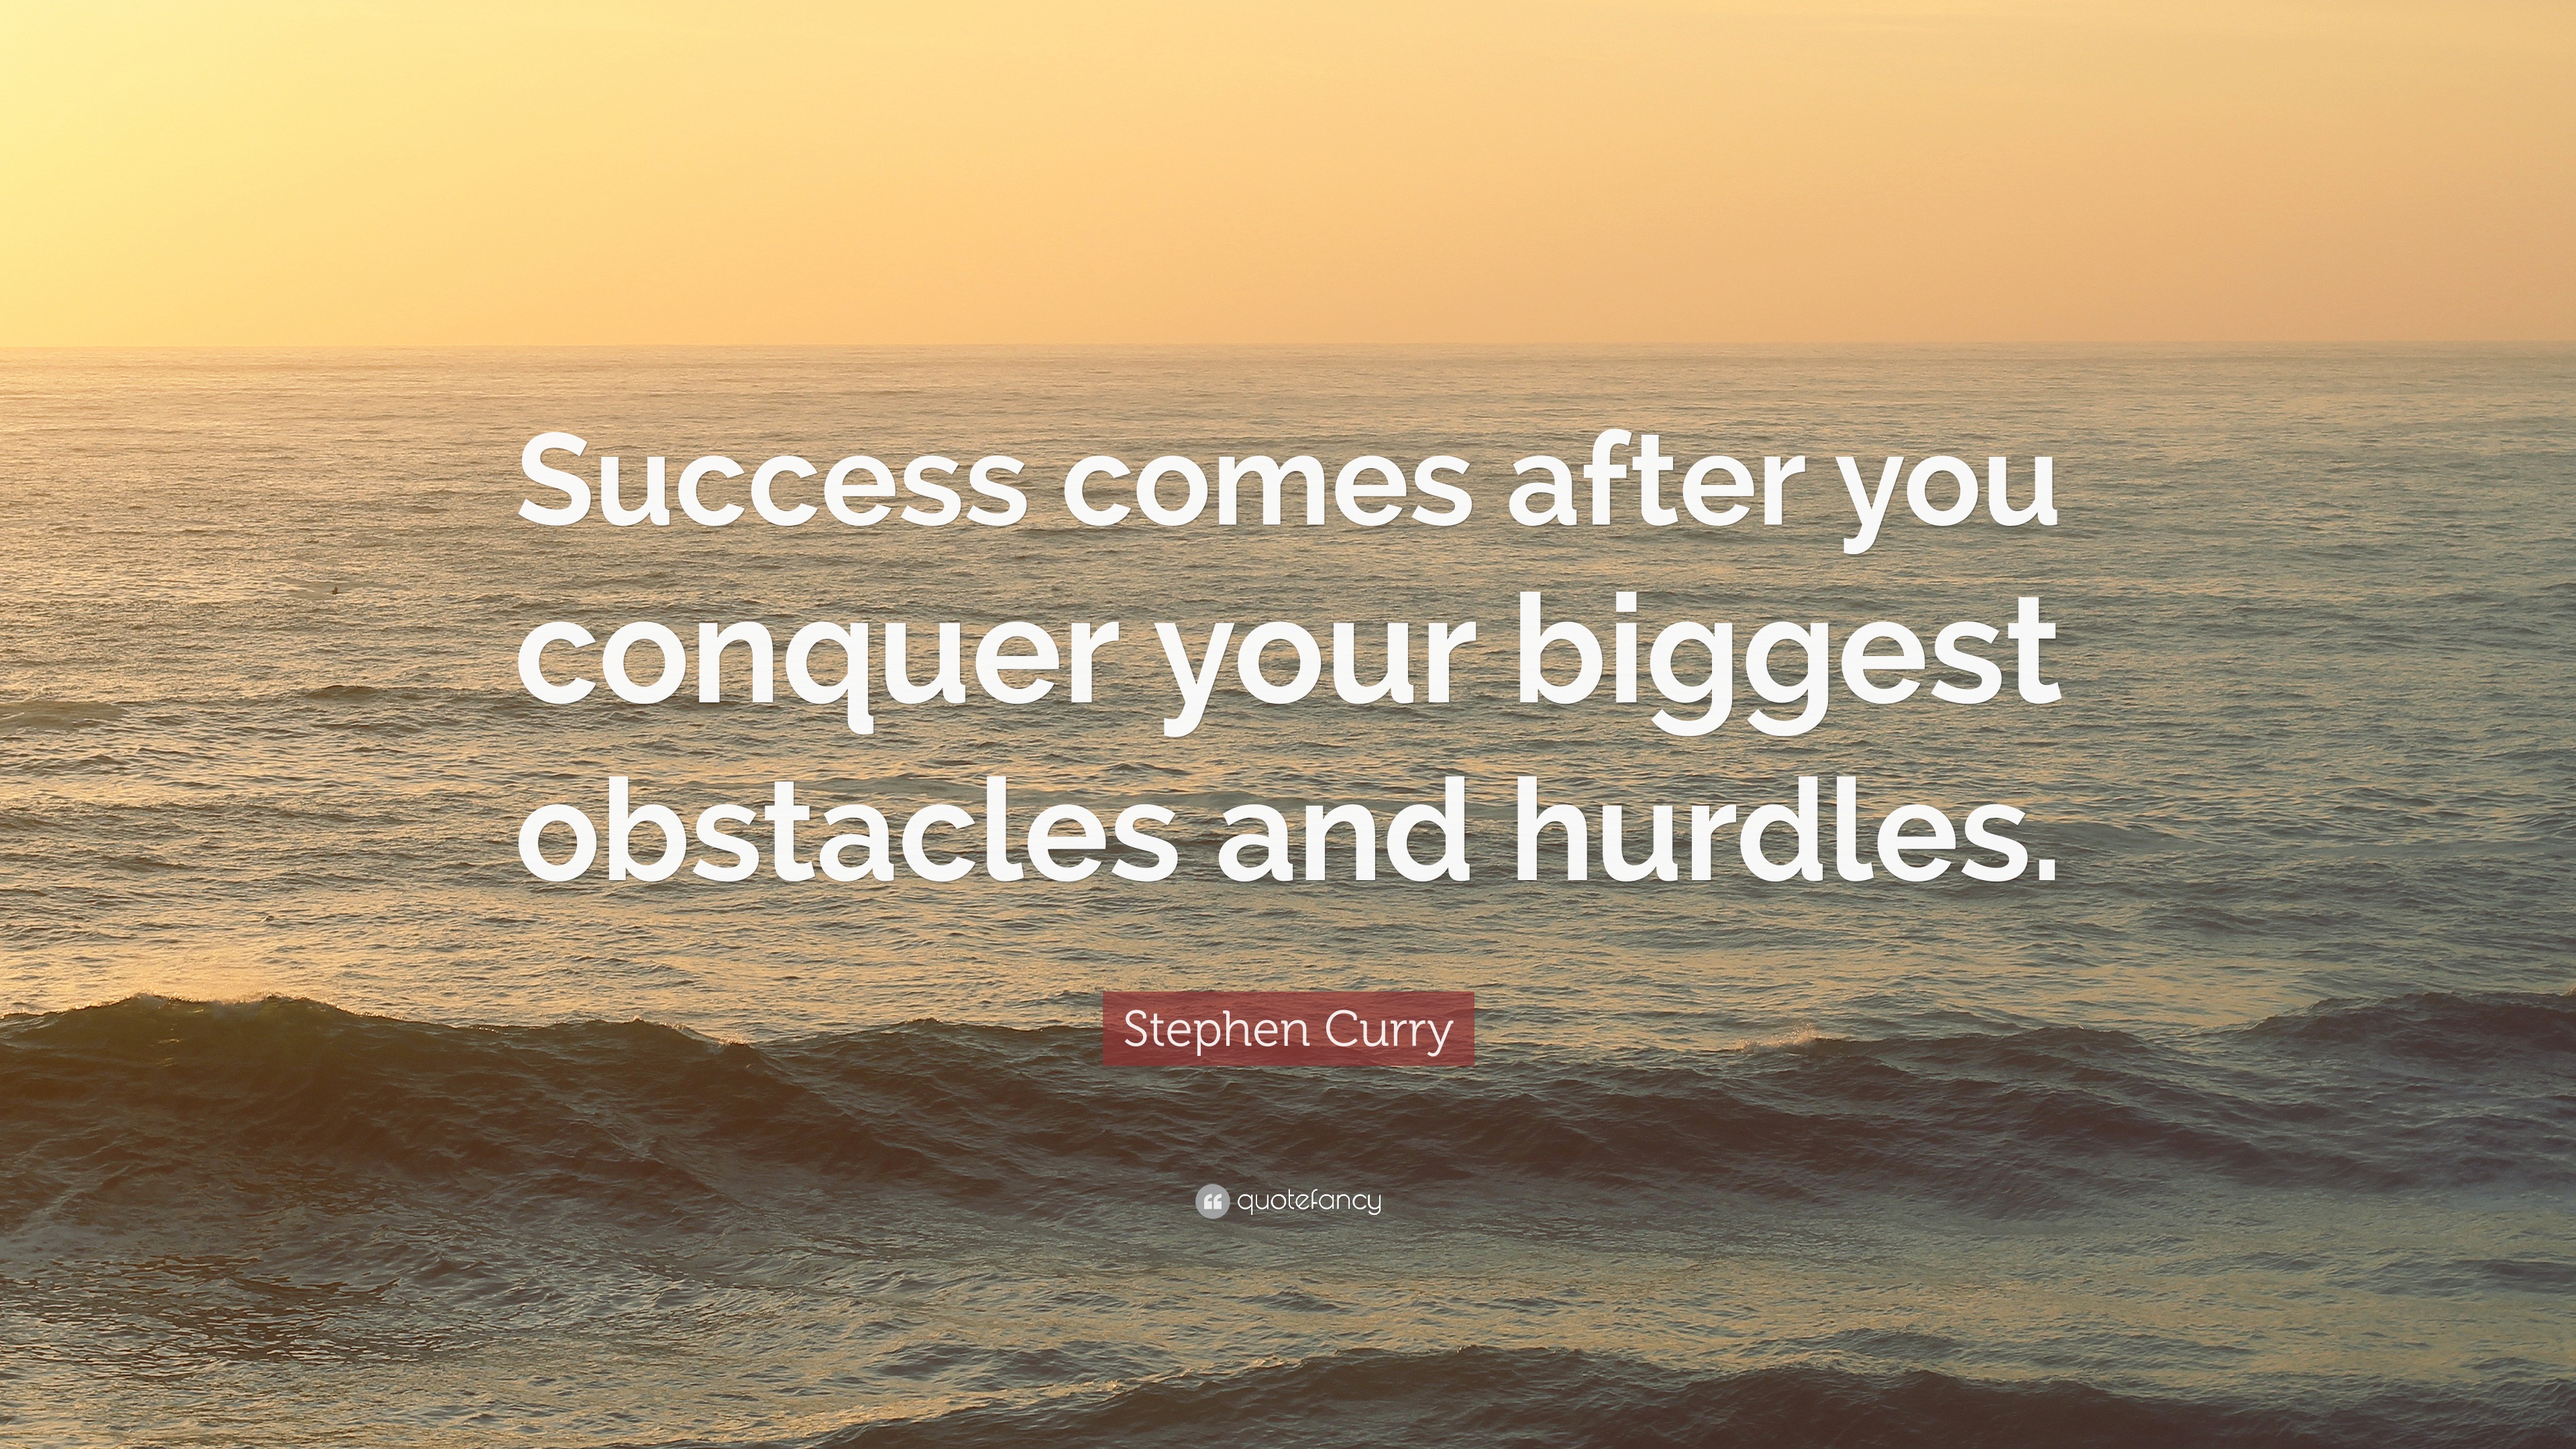 Stephen Curry Quote: “Success comes after you conquer your biggest